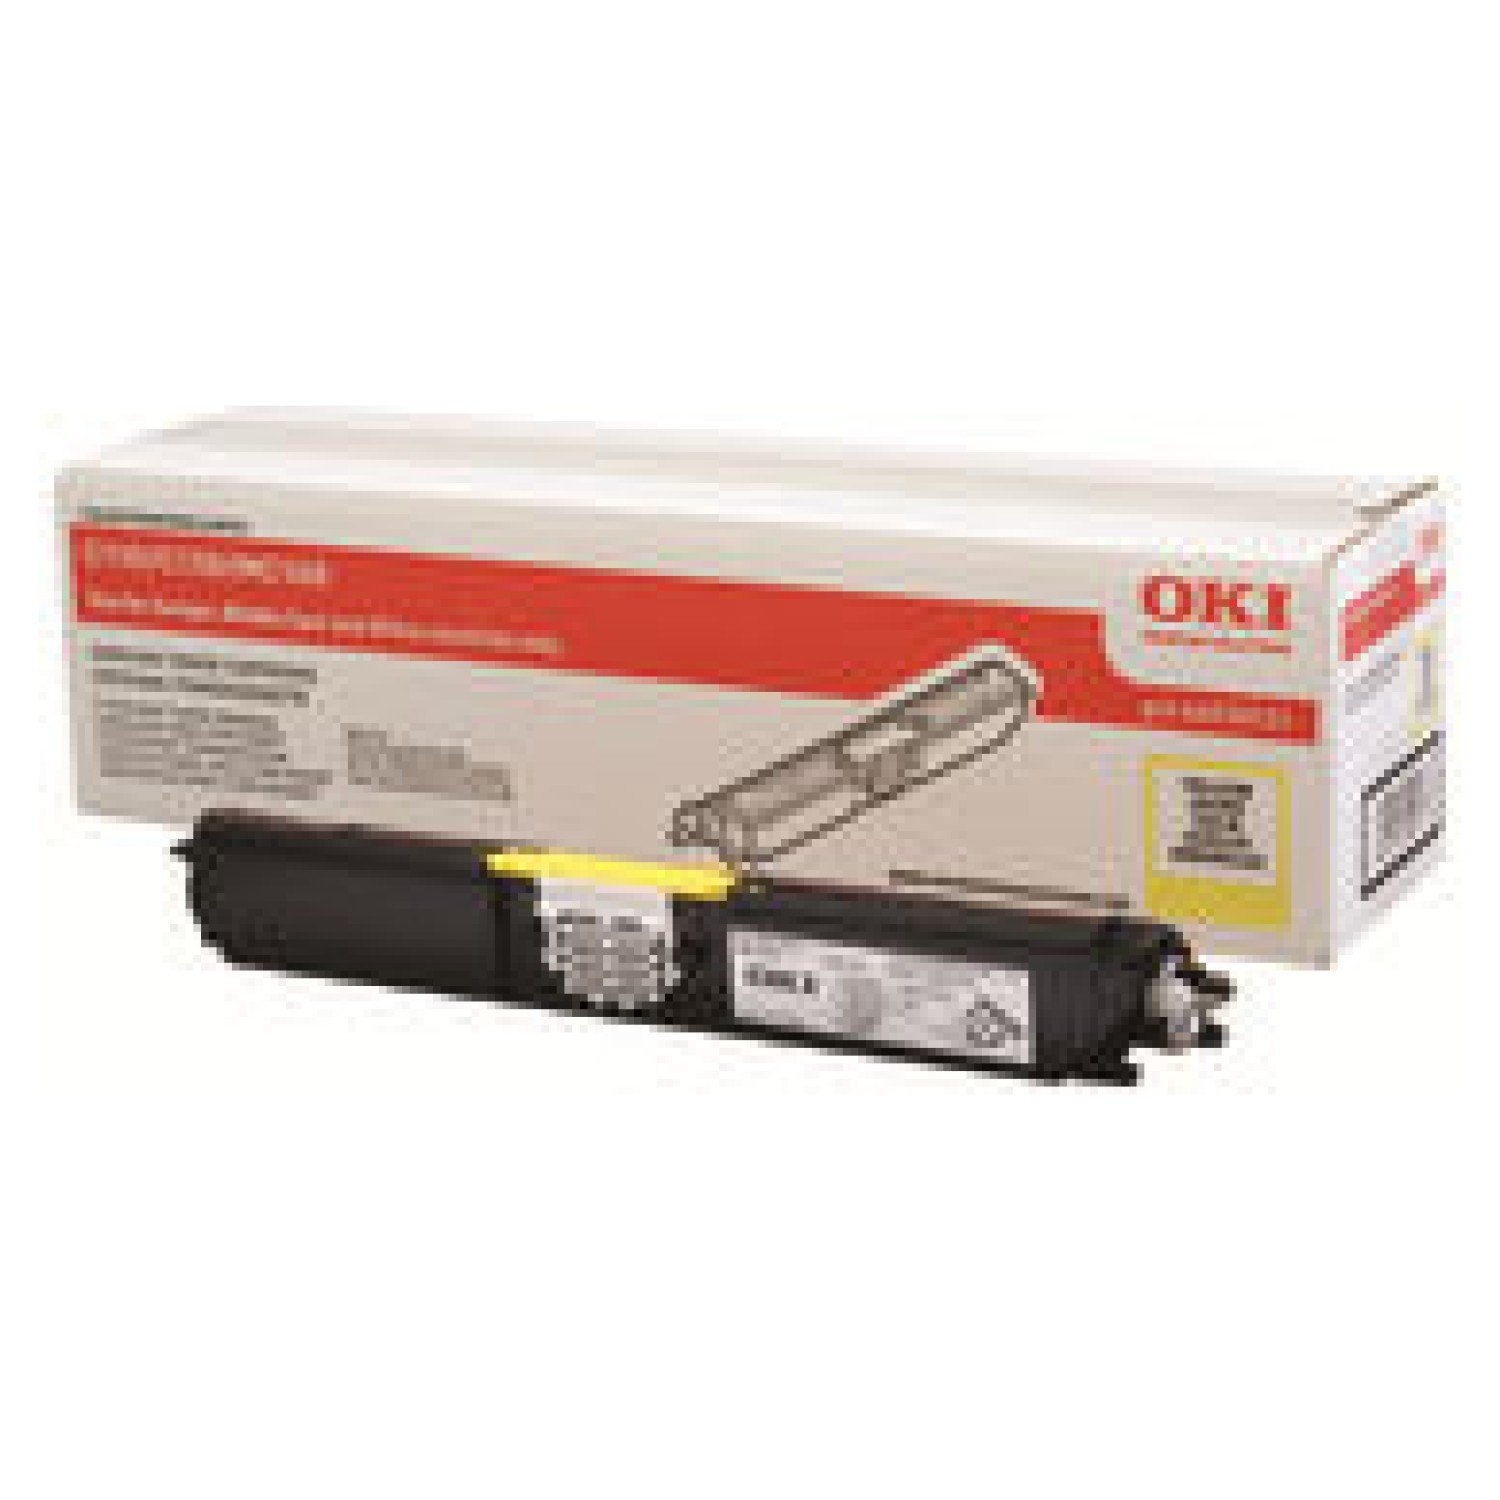 OKI Toner yellow 2500 pages for C110